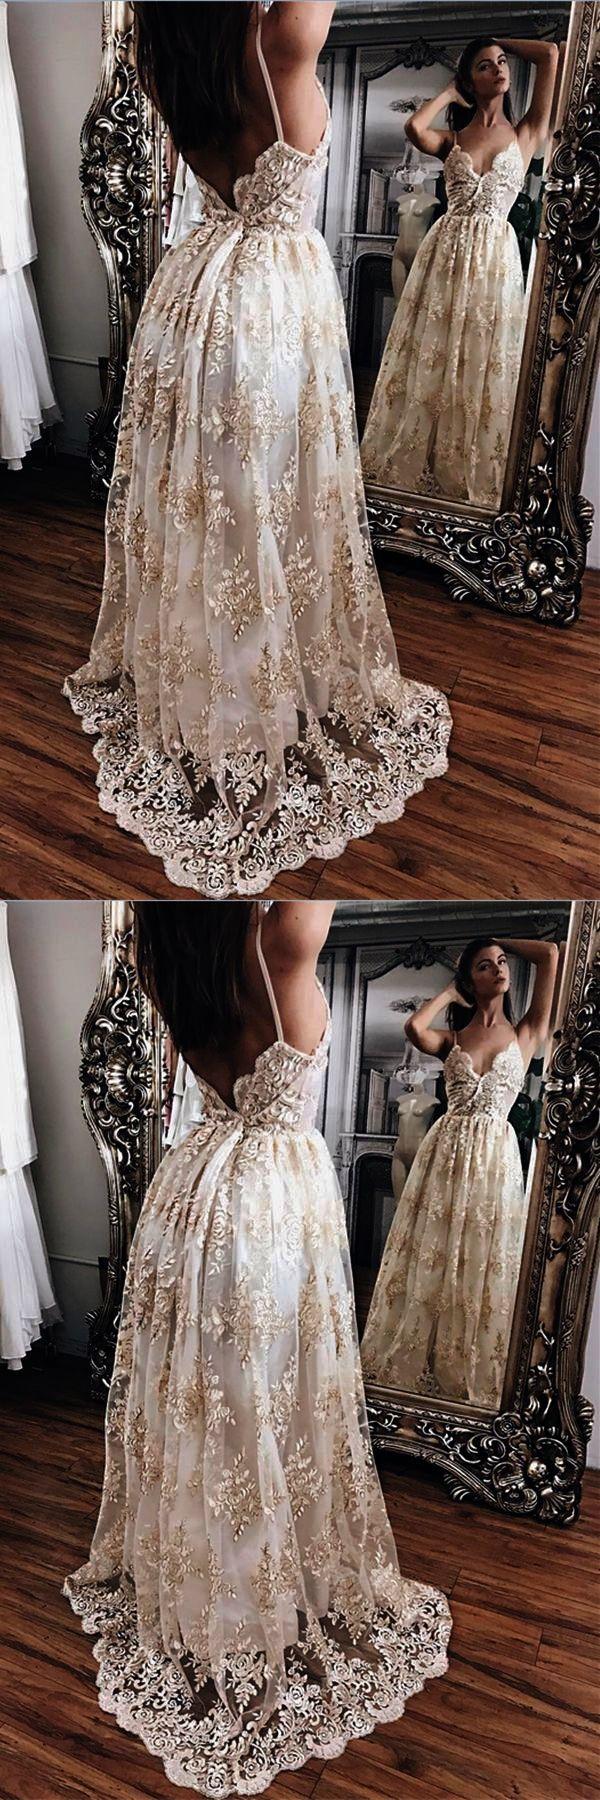 Mariage - Trendy - Most Beautiful Lace Wedding Dresses :-) 